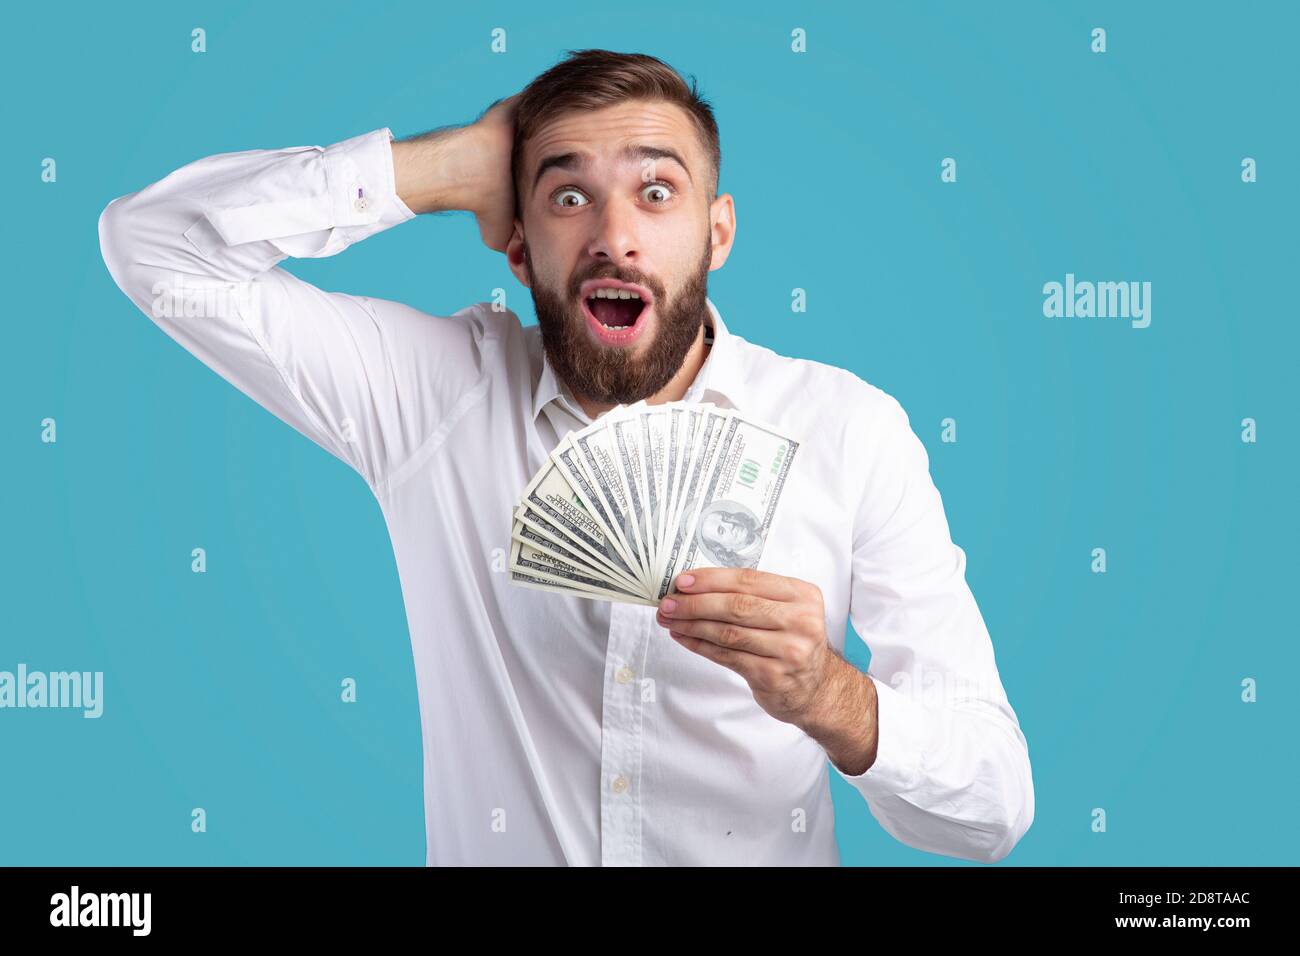 Excited Caucasian guy with fan of money touching his head in shock on ...